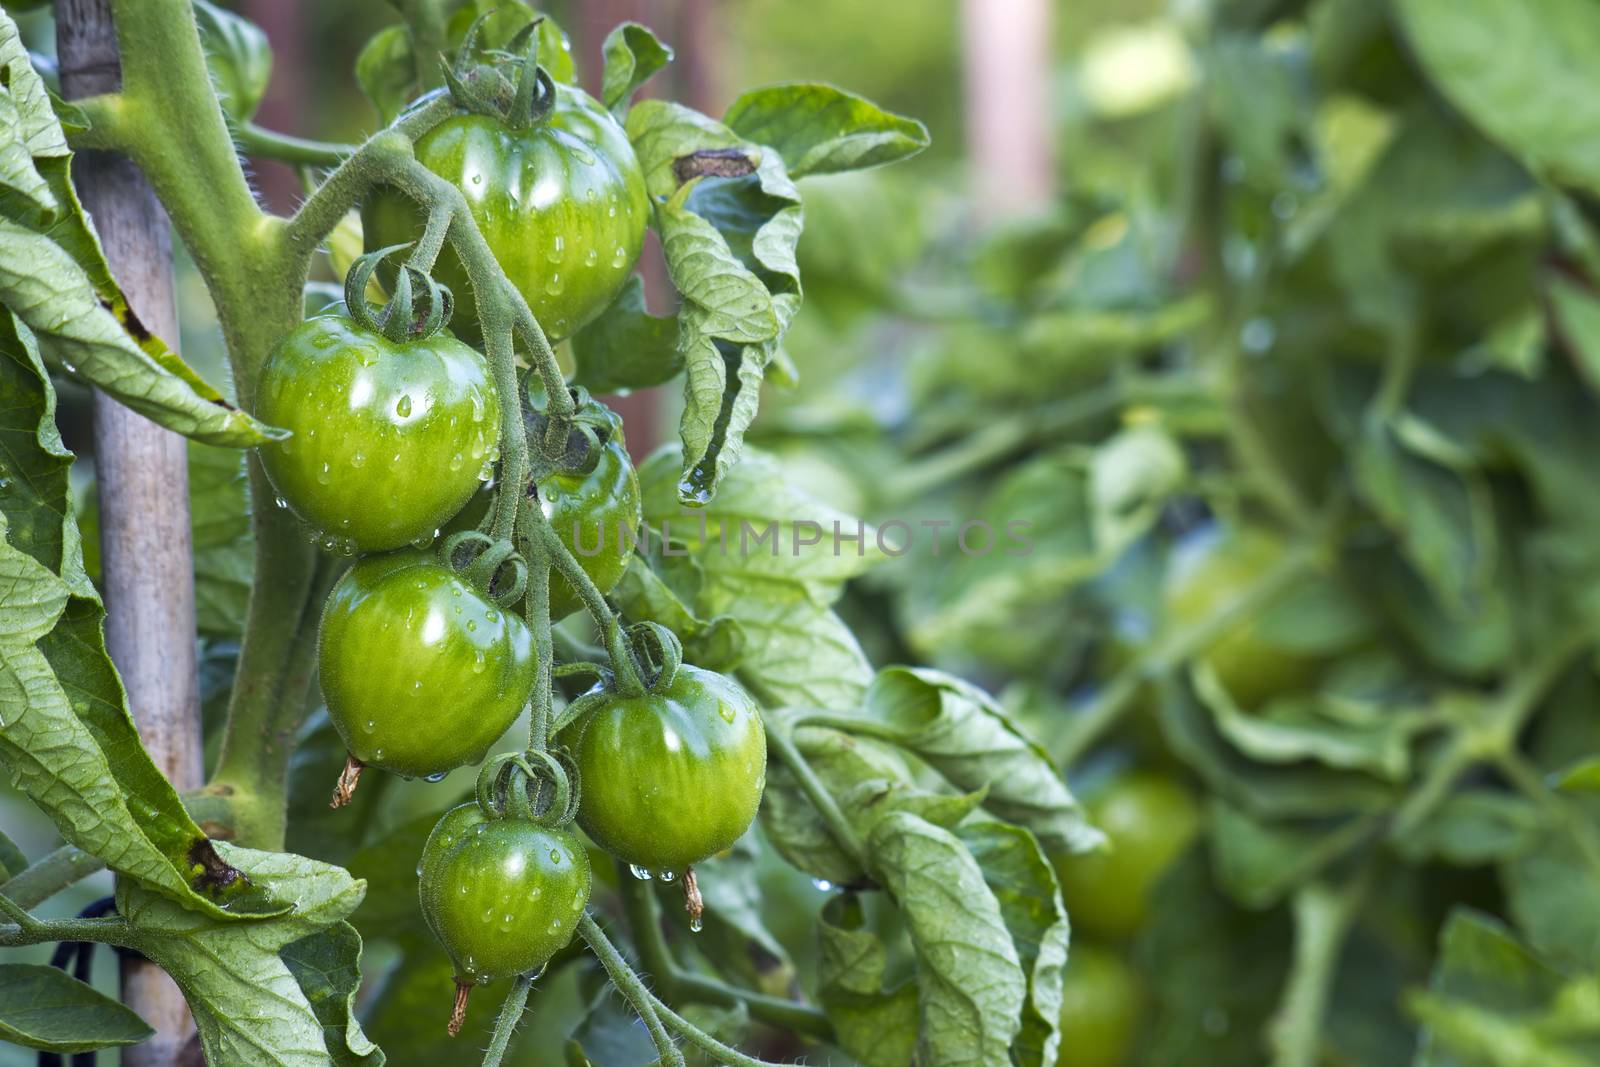 Green Tomatoes in a garden